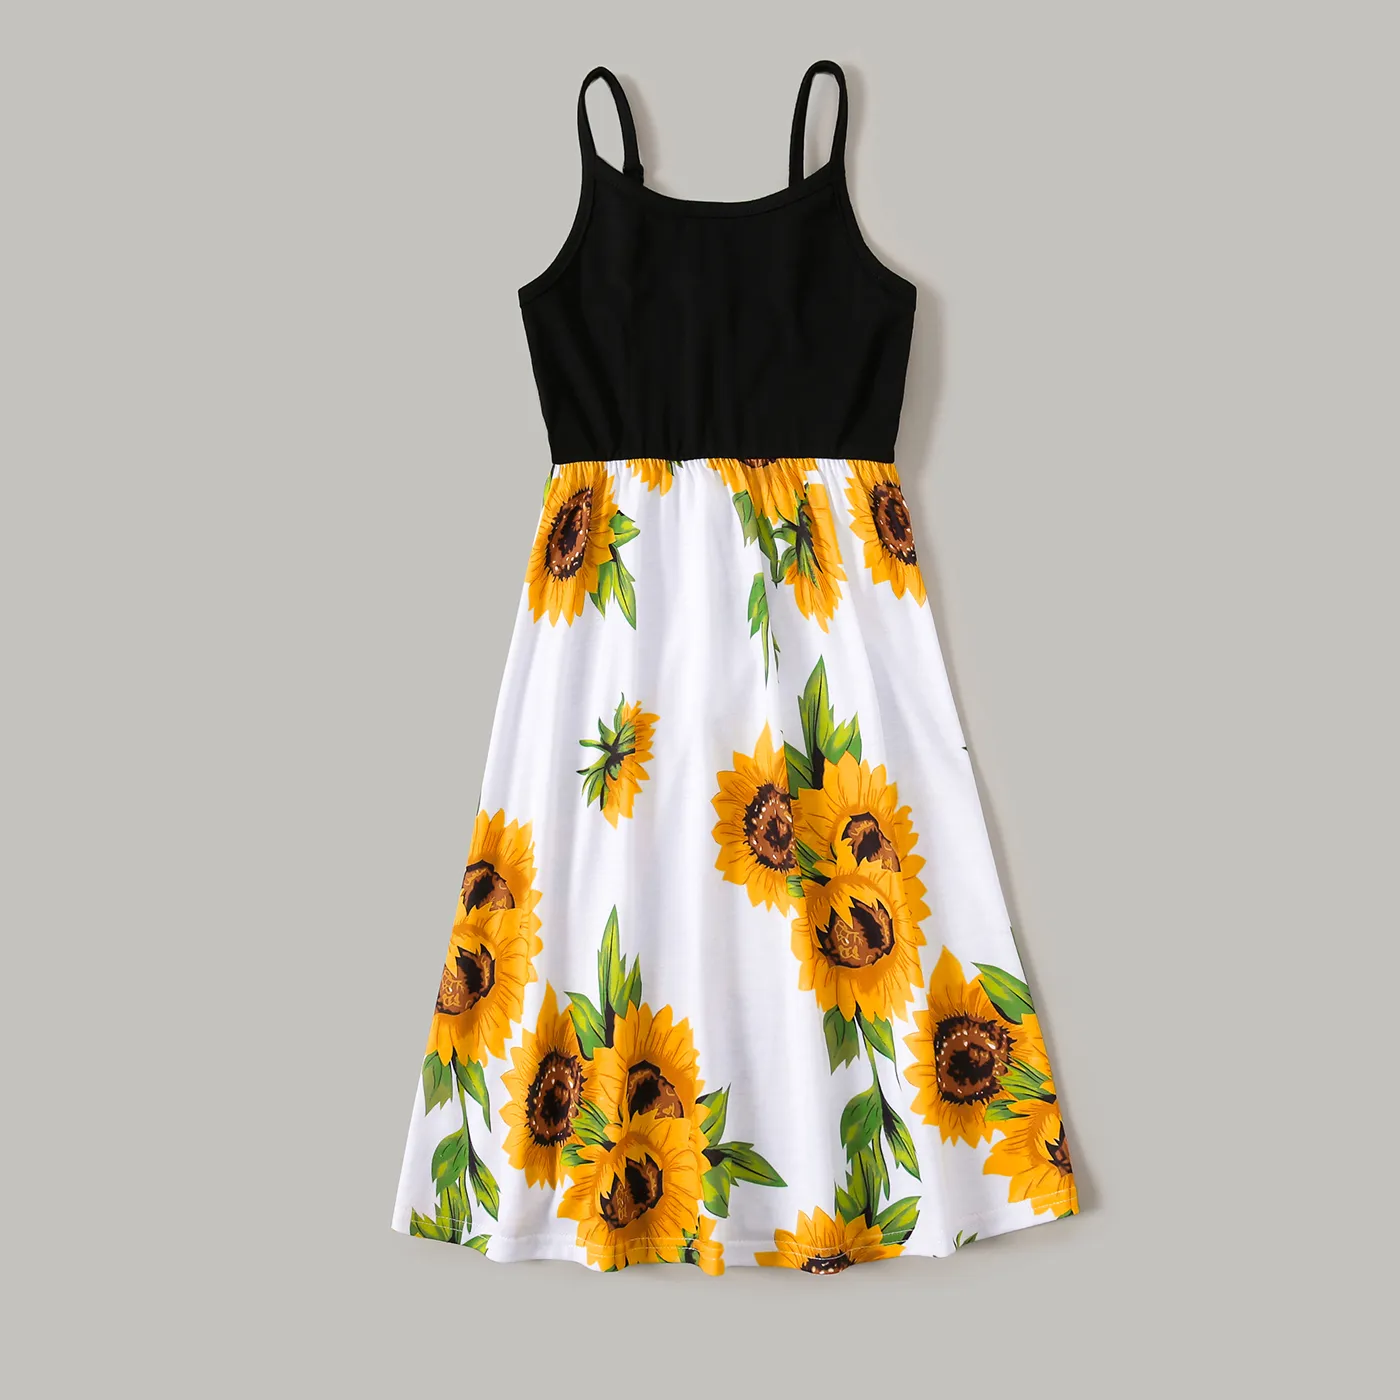 Family Matching Solid Spaghetti Strap Splicing Sunflower Floral Print Dresses And Short-sleeve T-shirts Sets